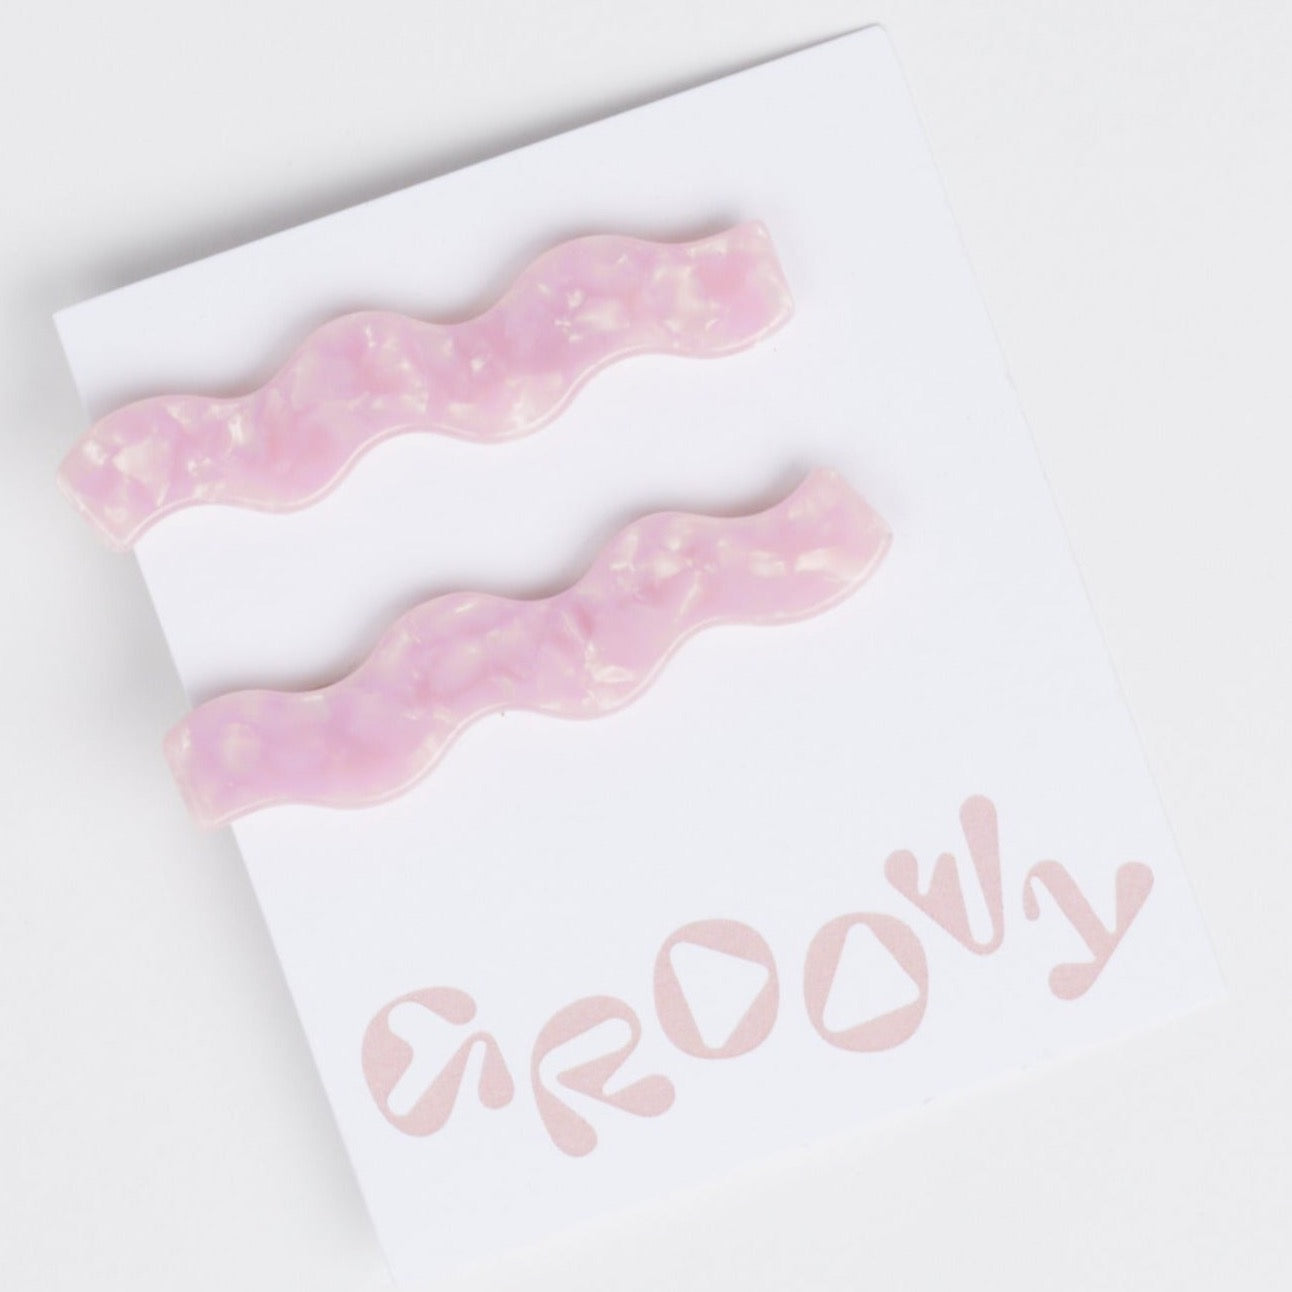 A set of two wavy pink acrylic hair barrettes against a white background.